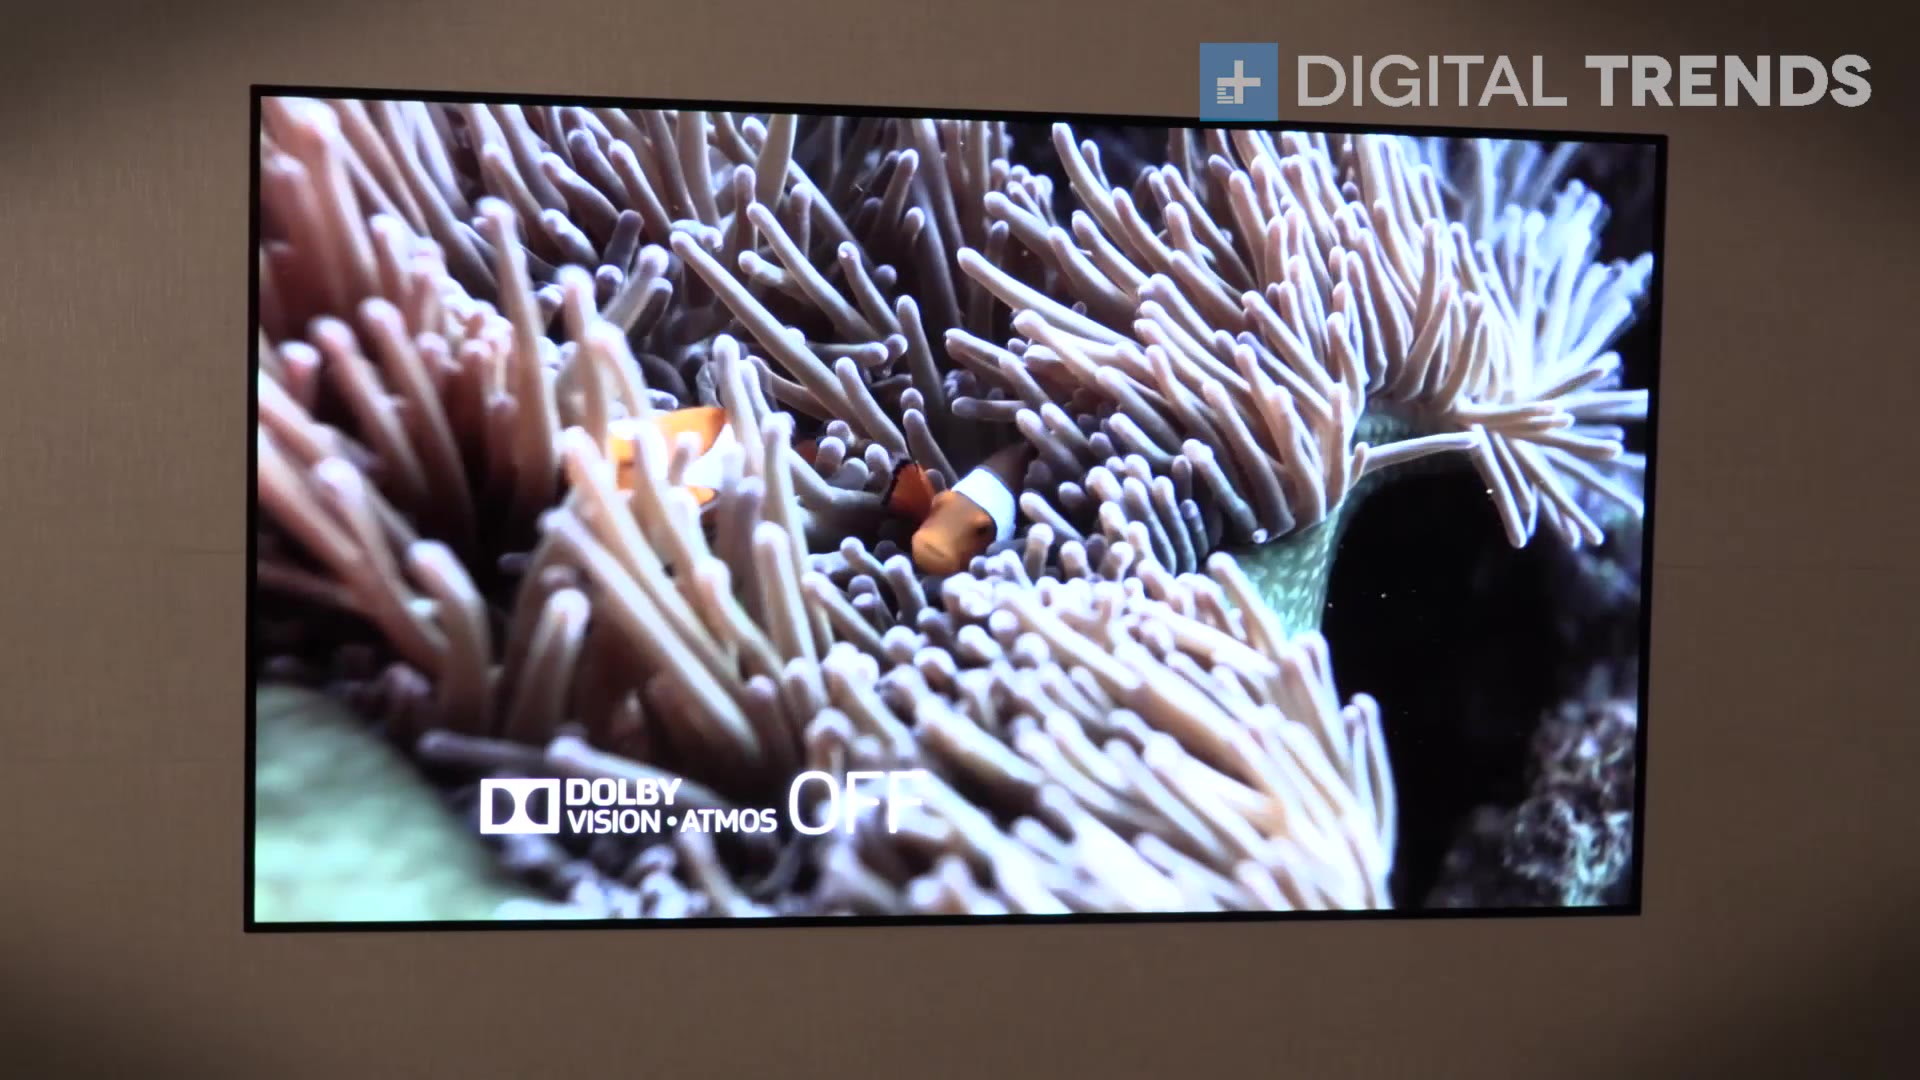 1920x1080 LG Wallpaper OLED TV Costs $8,000, Available For Pre-Order